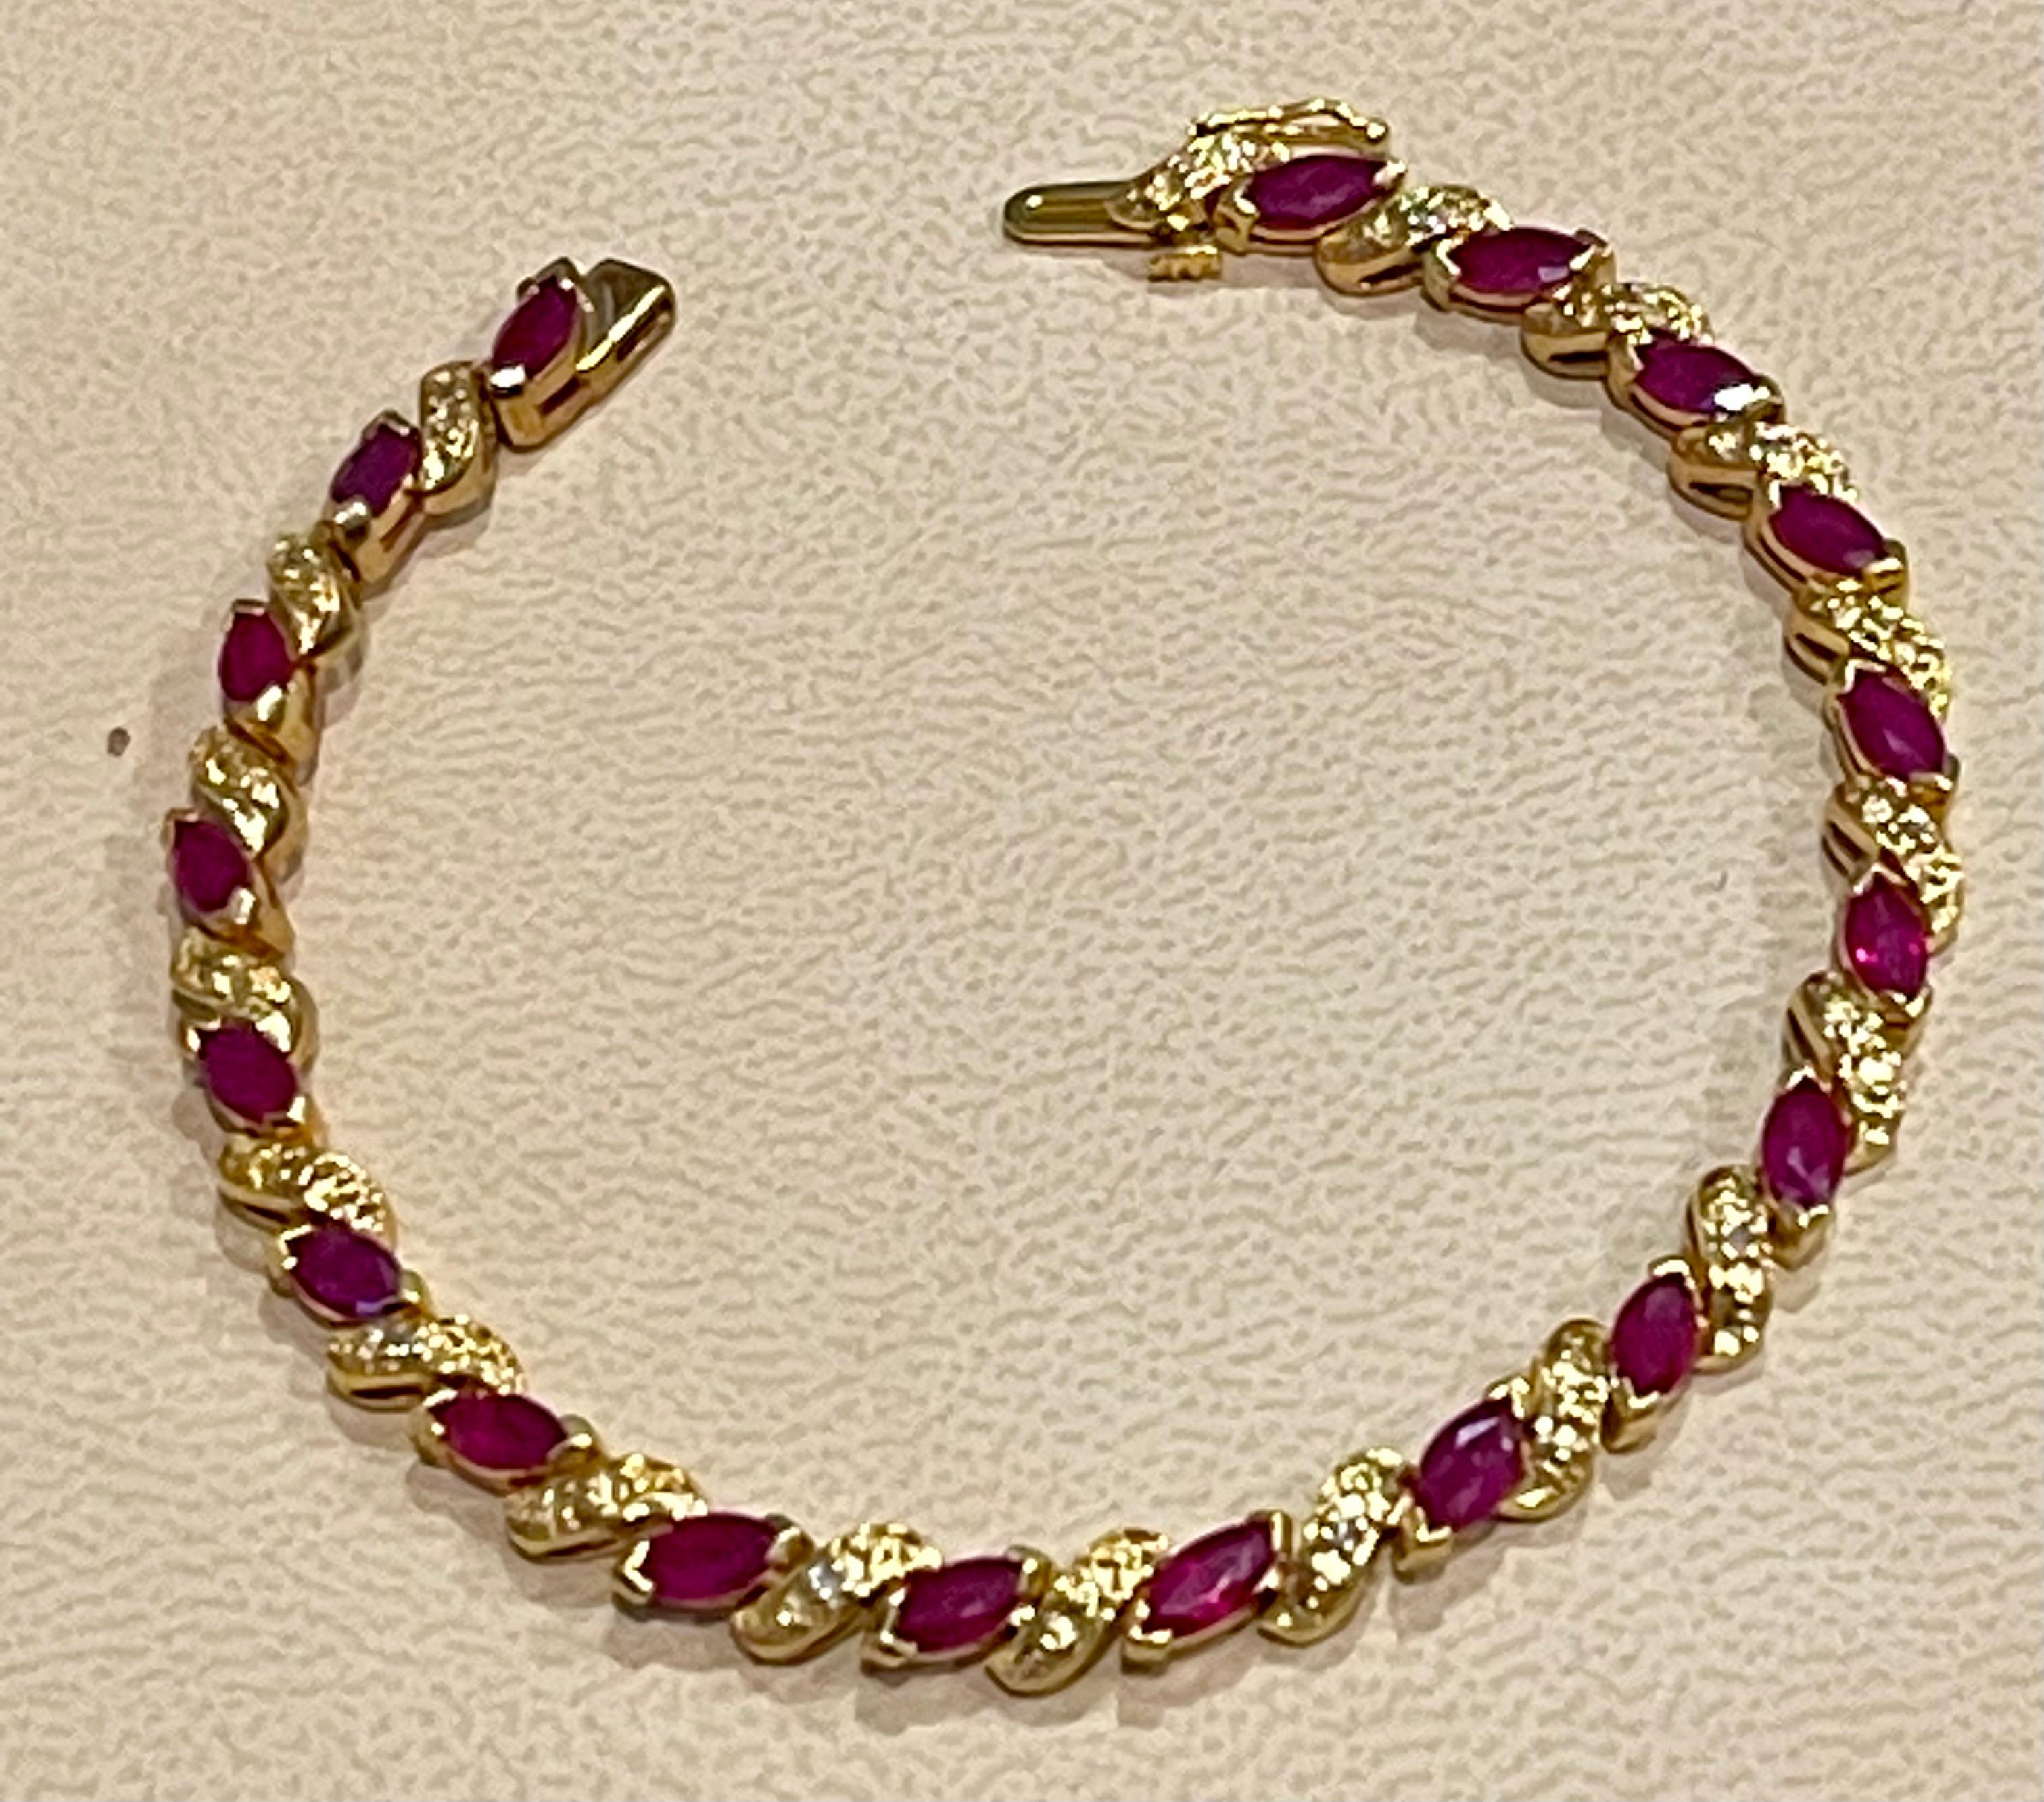  This bracelet boasts marquise-cut  Rubies in 14k Yellow Gold.
 prong settings, beautifully complemented by glittering s shape gold links
 Together these elements make this bracelet beautiful. . These are natural Rubies
 They have a signature medium